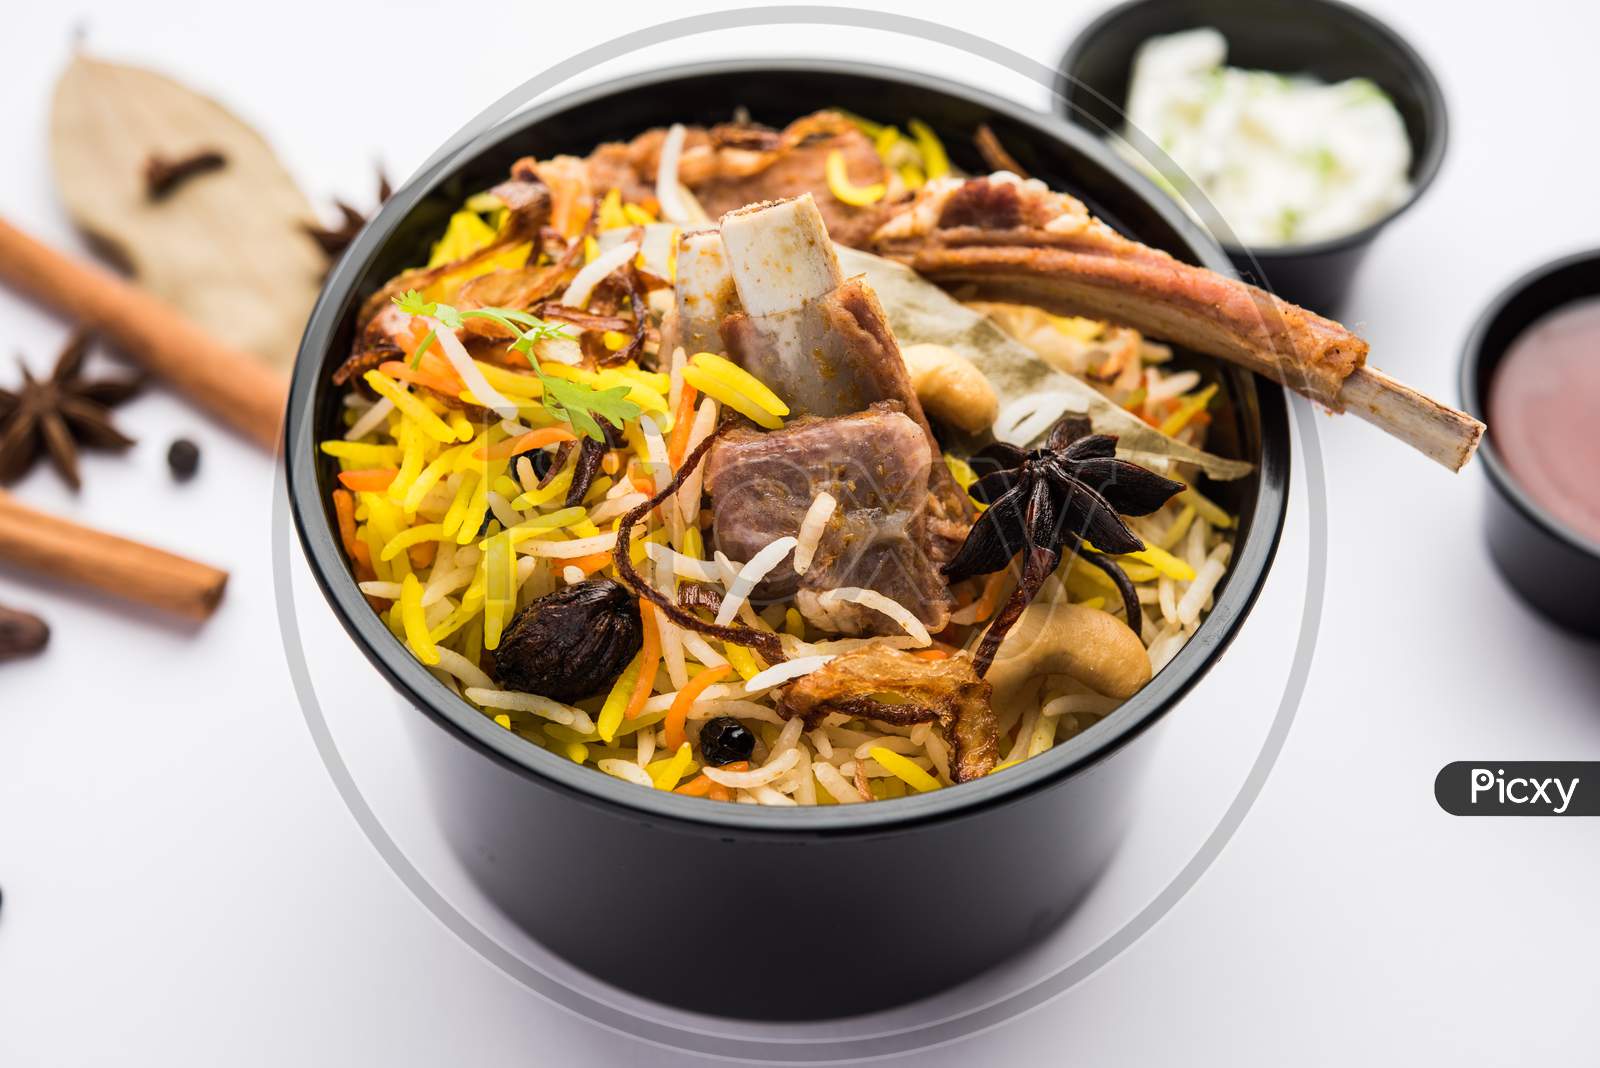 Gosht Or Mutton Biryani Is A Popular Non-Veg Food From India, Packed In Plastic Container